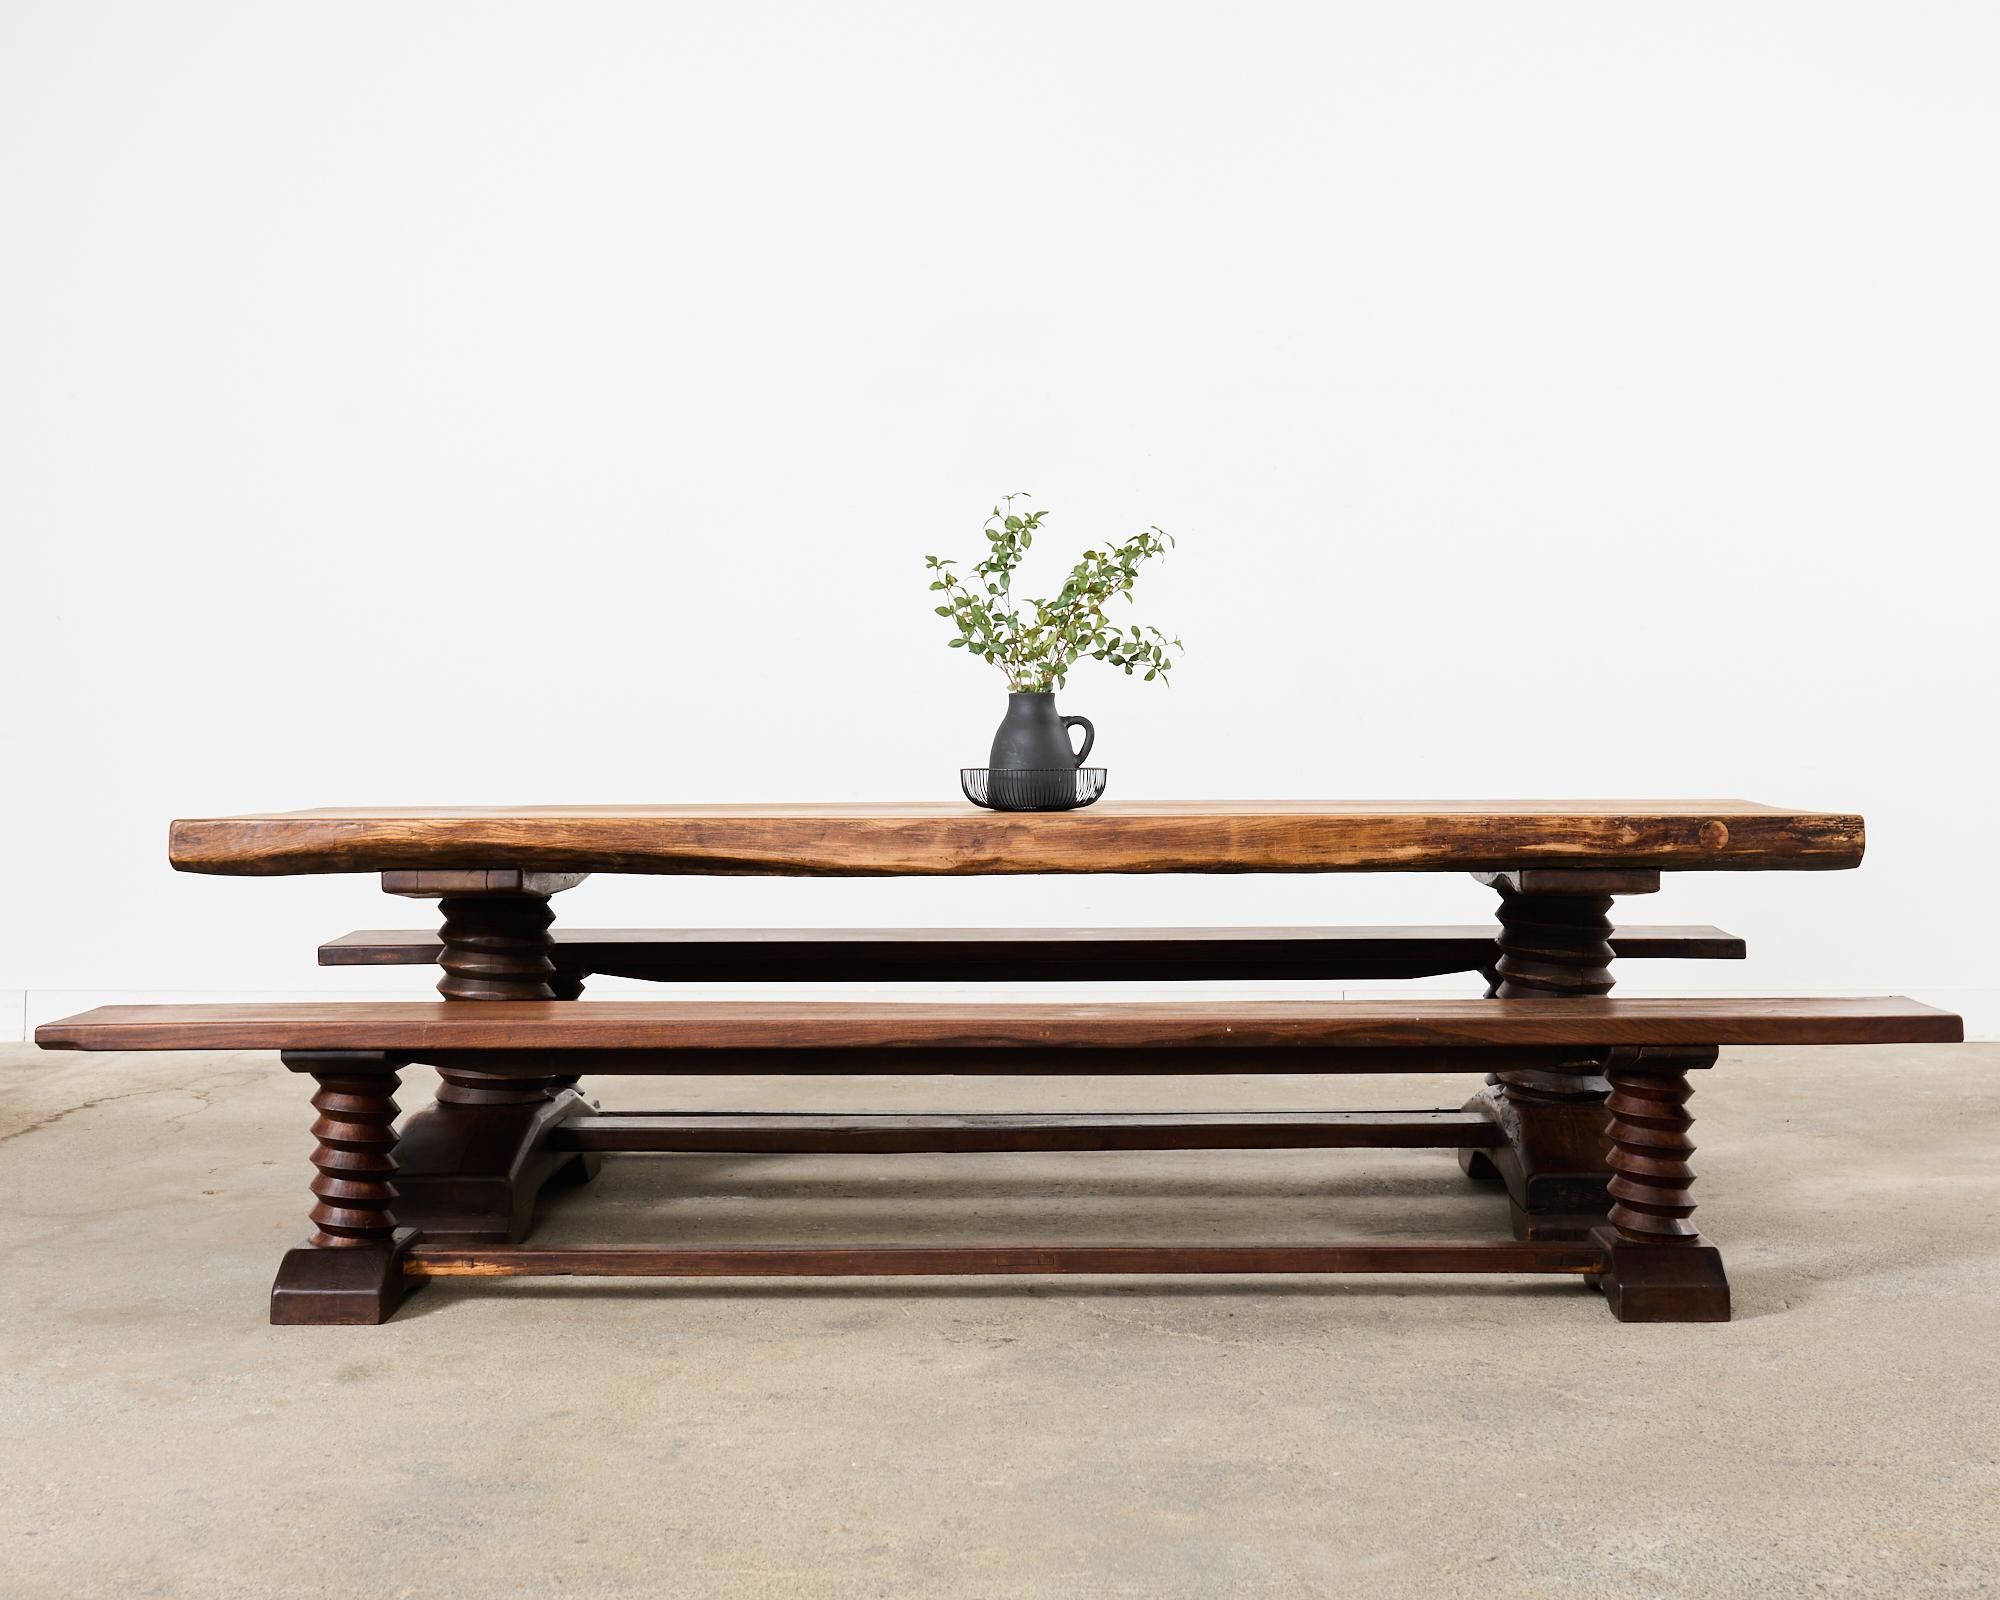 Rare mid-century modern monumental oak trestle dining table attributed to French designer Charles Dudouyt (French 1885-1946). The massive table features a solid hand-hewn top crafted from nearly 4 inch thick oak timbers. The heavy top is supported